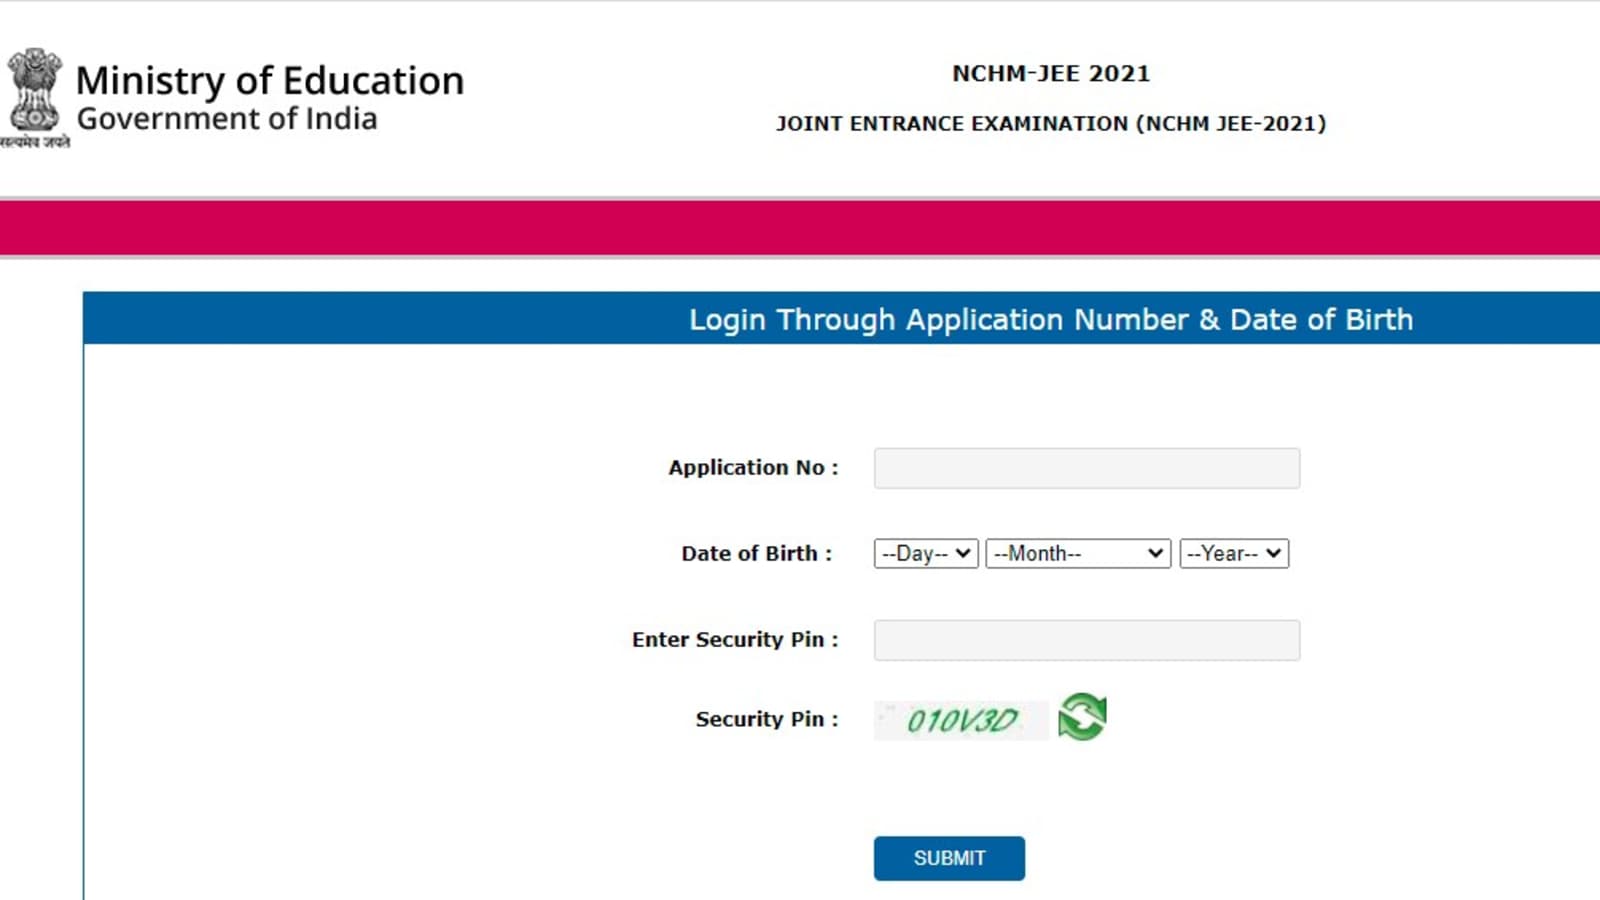 NCHM JEE admit card 2021 released at nchmjee.nta.nic.in, direct link